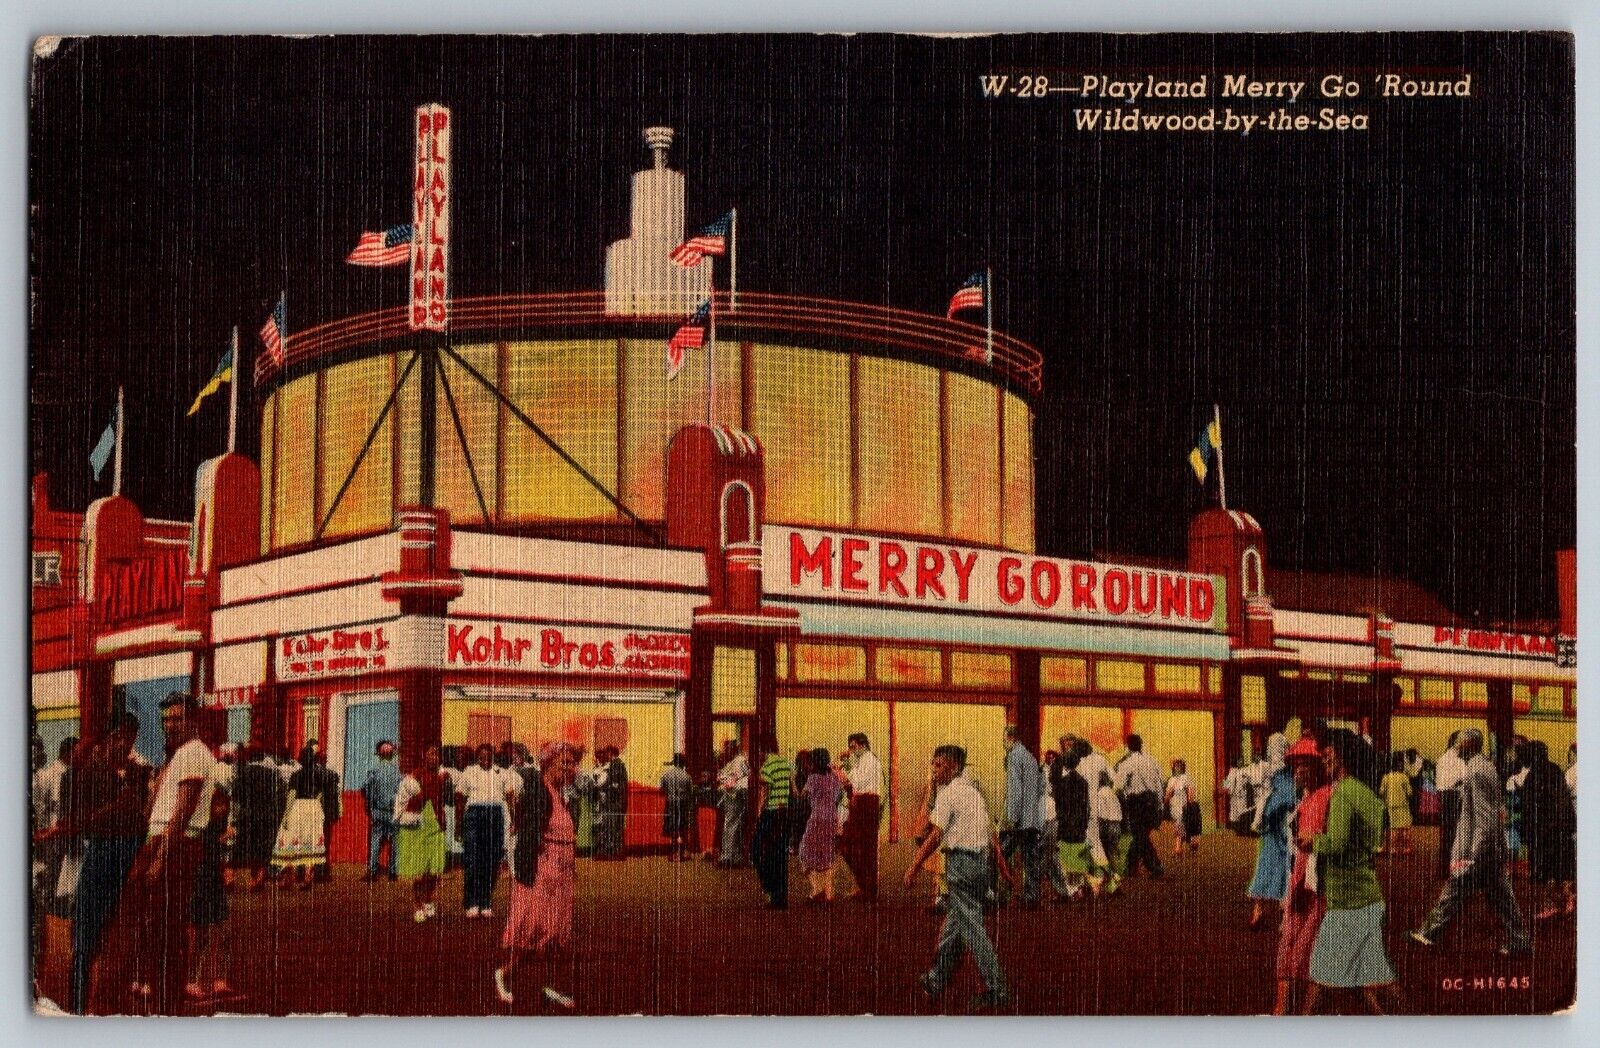 Wildwood-by-the-Sea, New Jersey - Playland Merry Go \'Round - Vintage Postcard